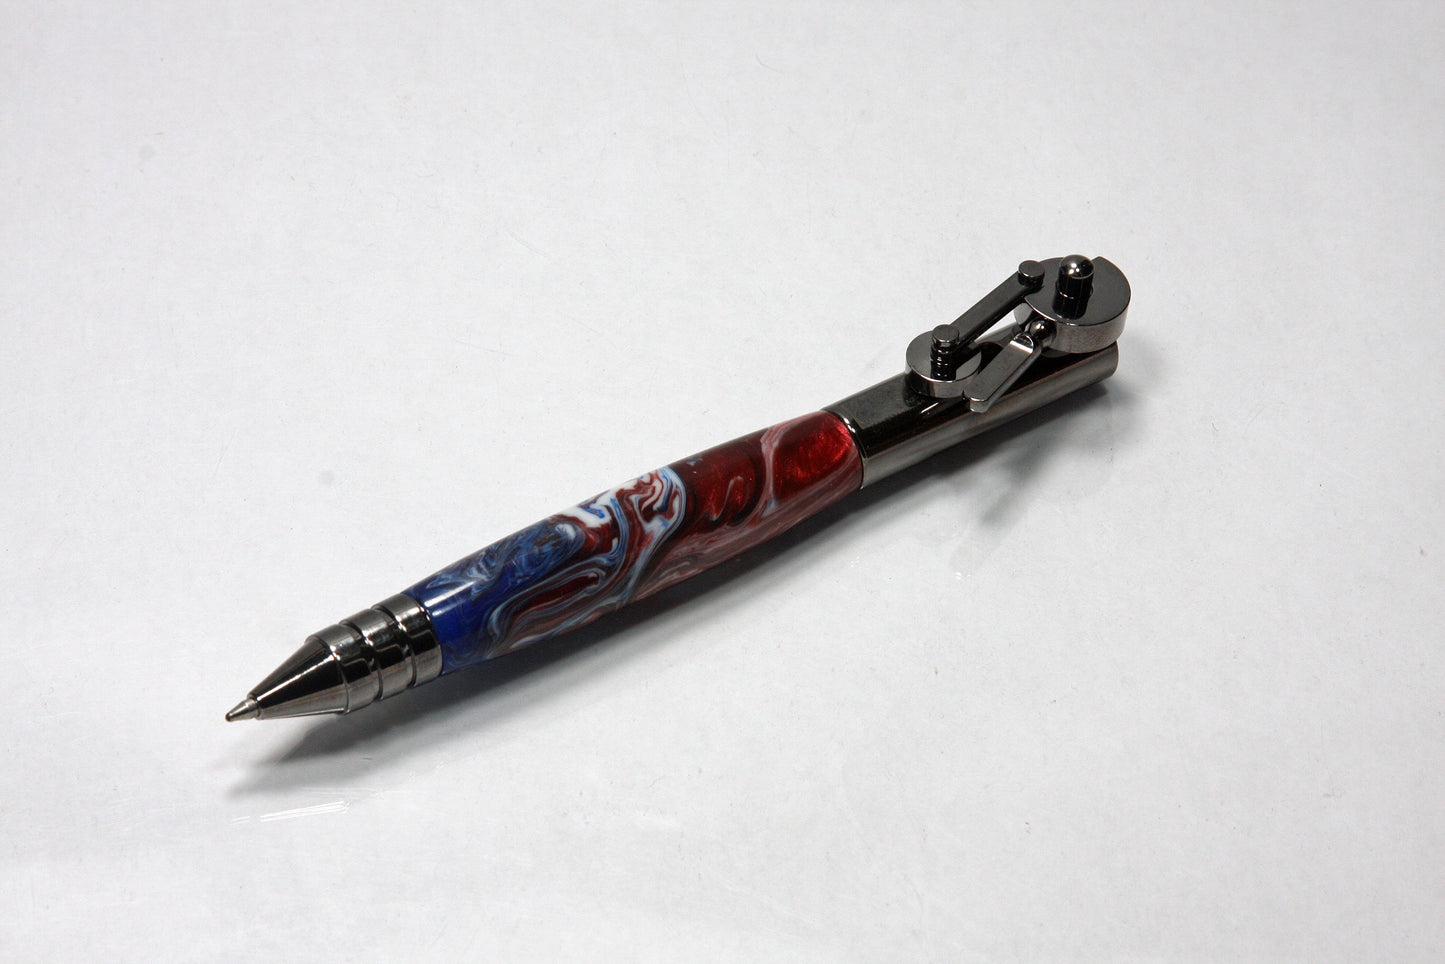 Steampunk Inspired Piston Ballpoint Pen with Clever Gear Action